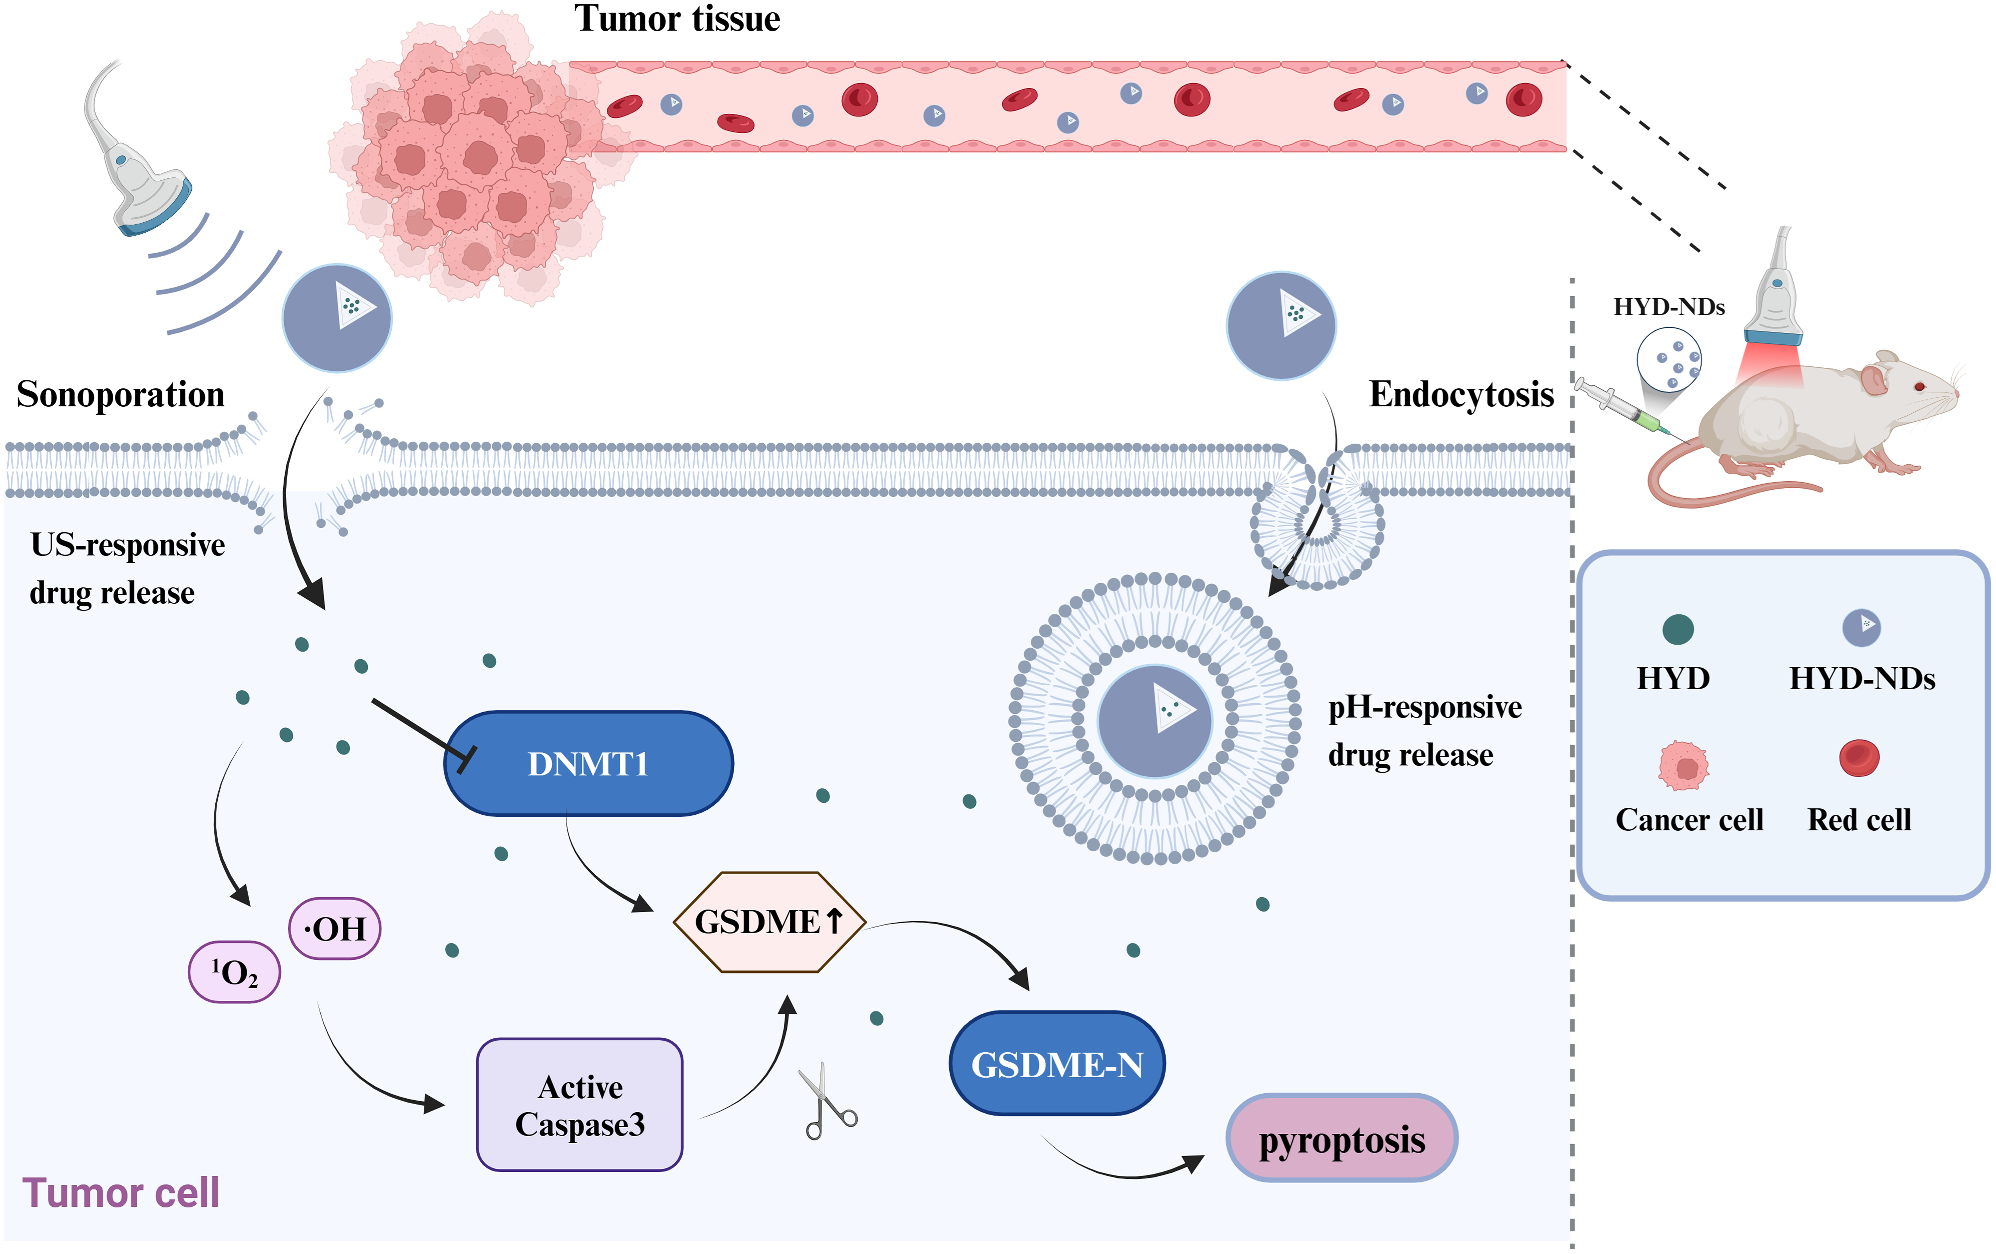 Hydralazine loaded nanodroplets combined with ultrasound-targeted microbubble destruction to induce pyroptosis for tumor treatment